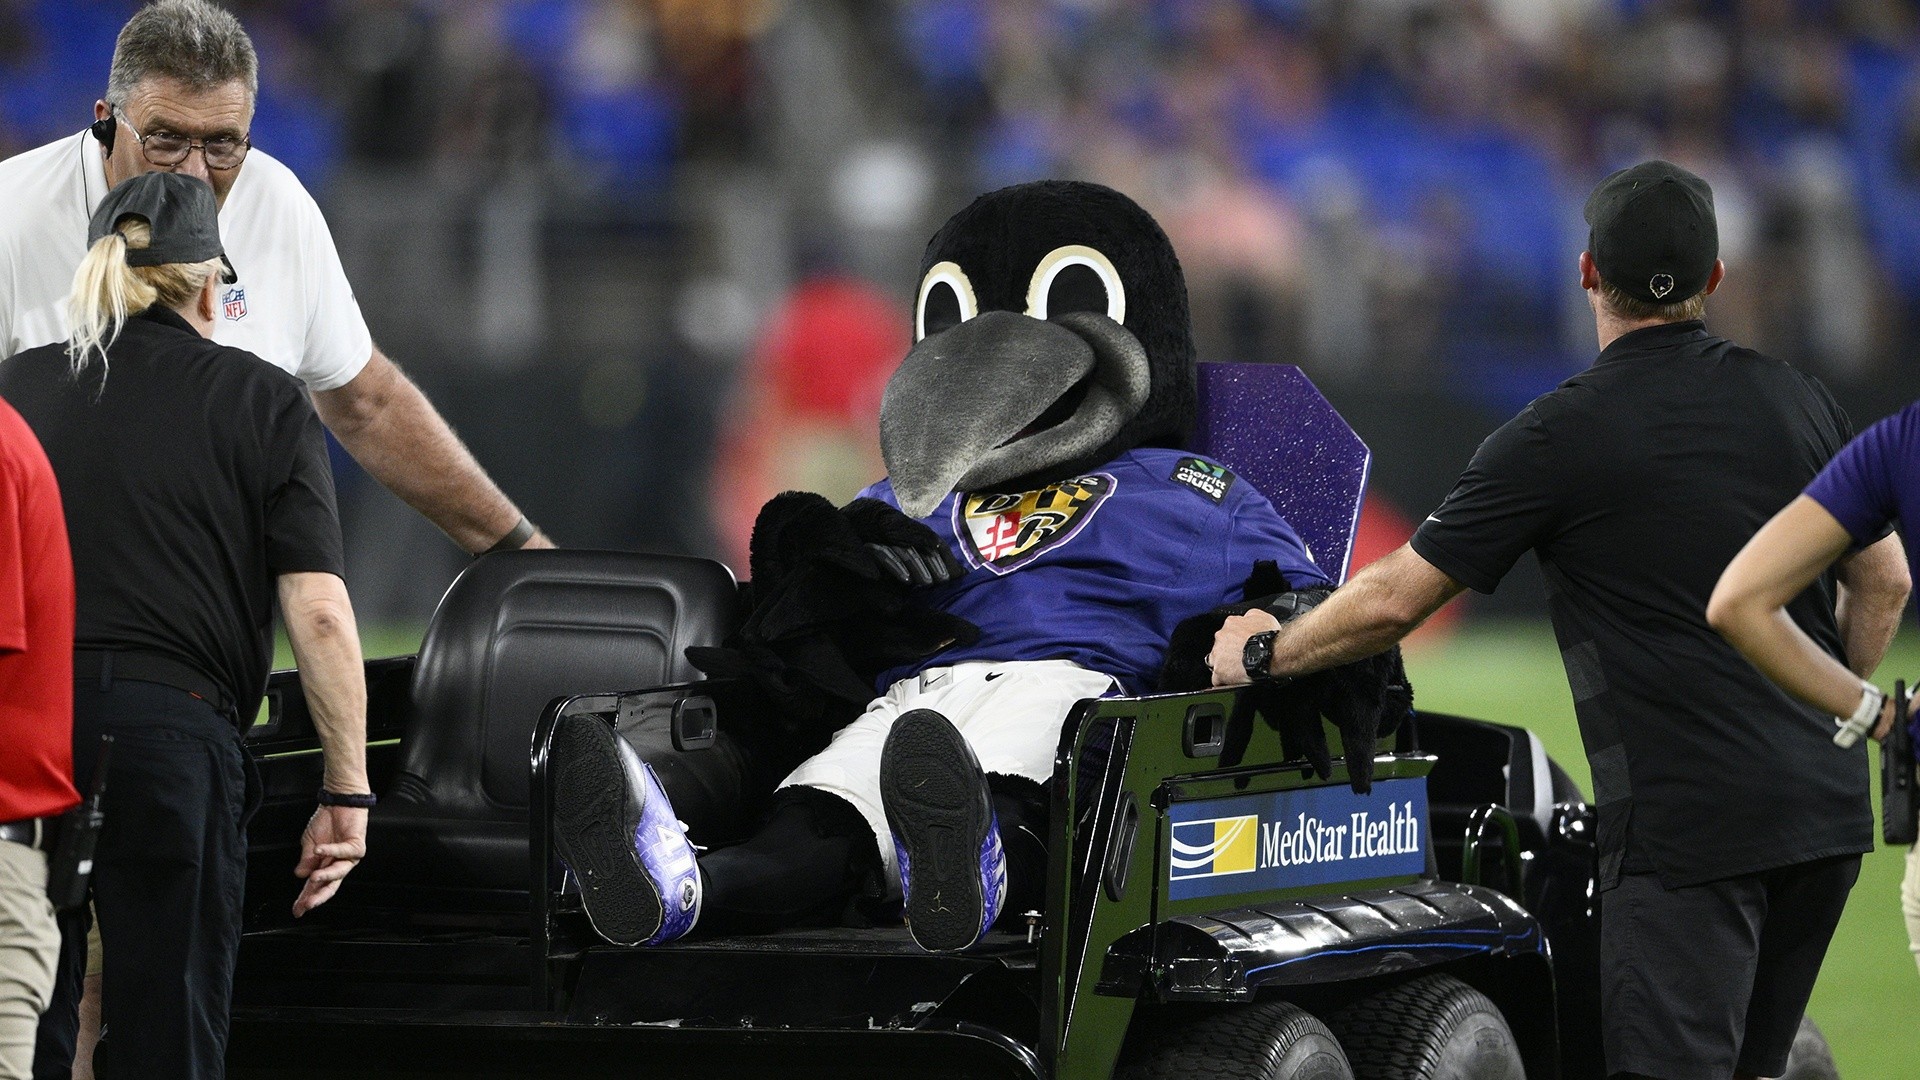 Baltimore Ravens mascot placed on leave after injury